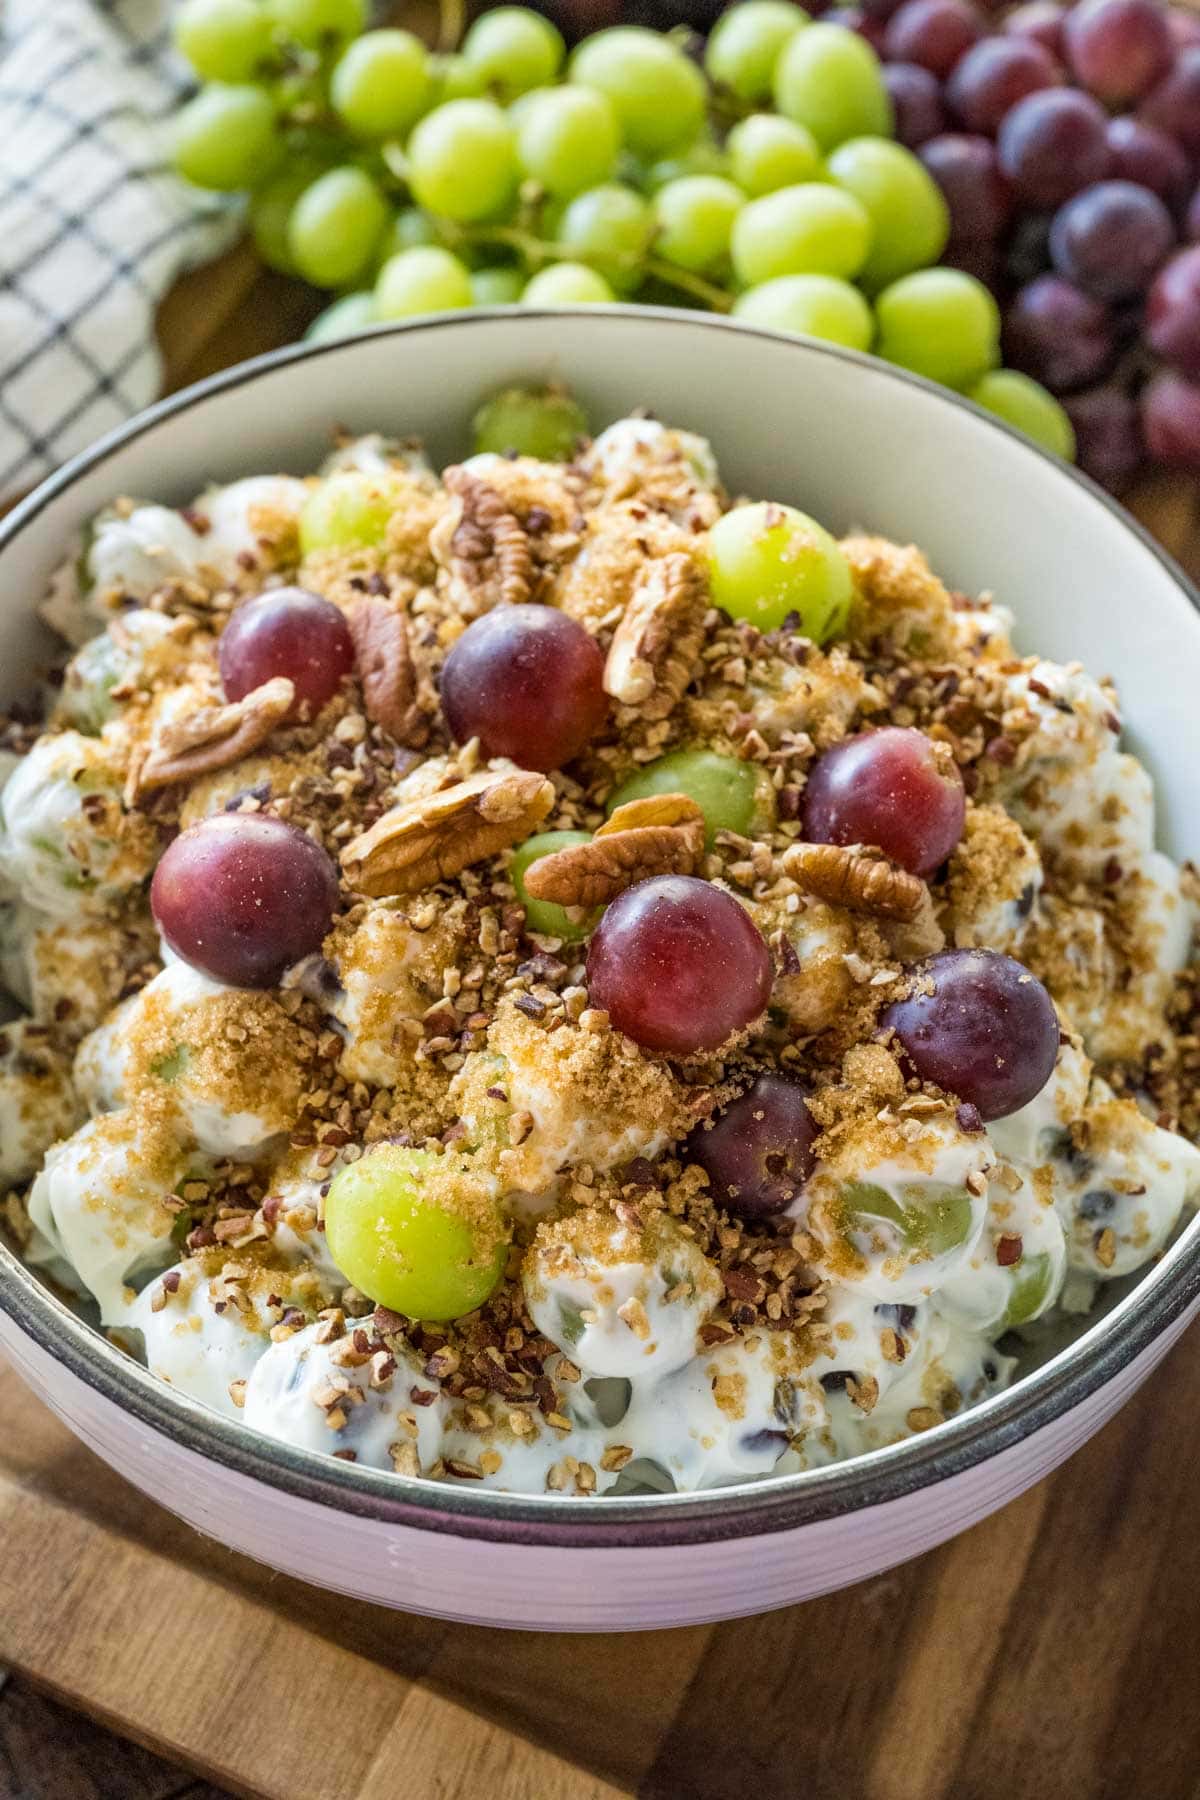 Creamy grape salad in a white bowl garnished with fresh grapes, pecans and crunchy brown sugar topping.